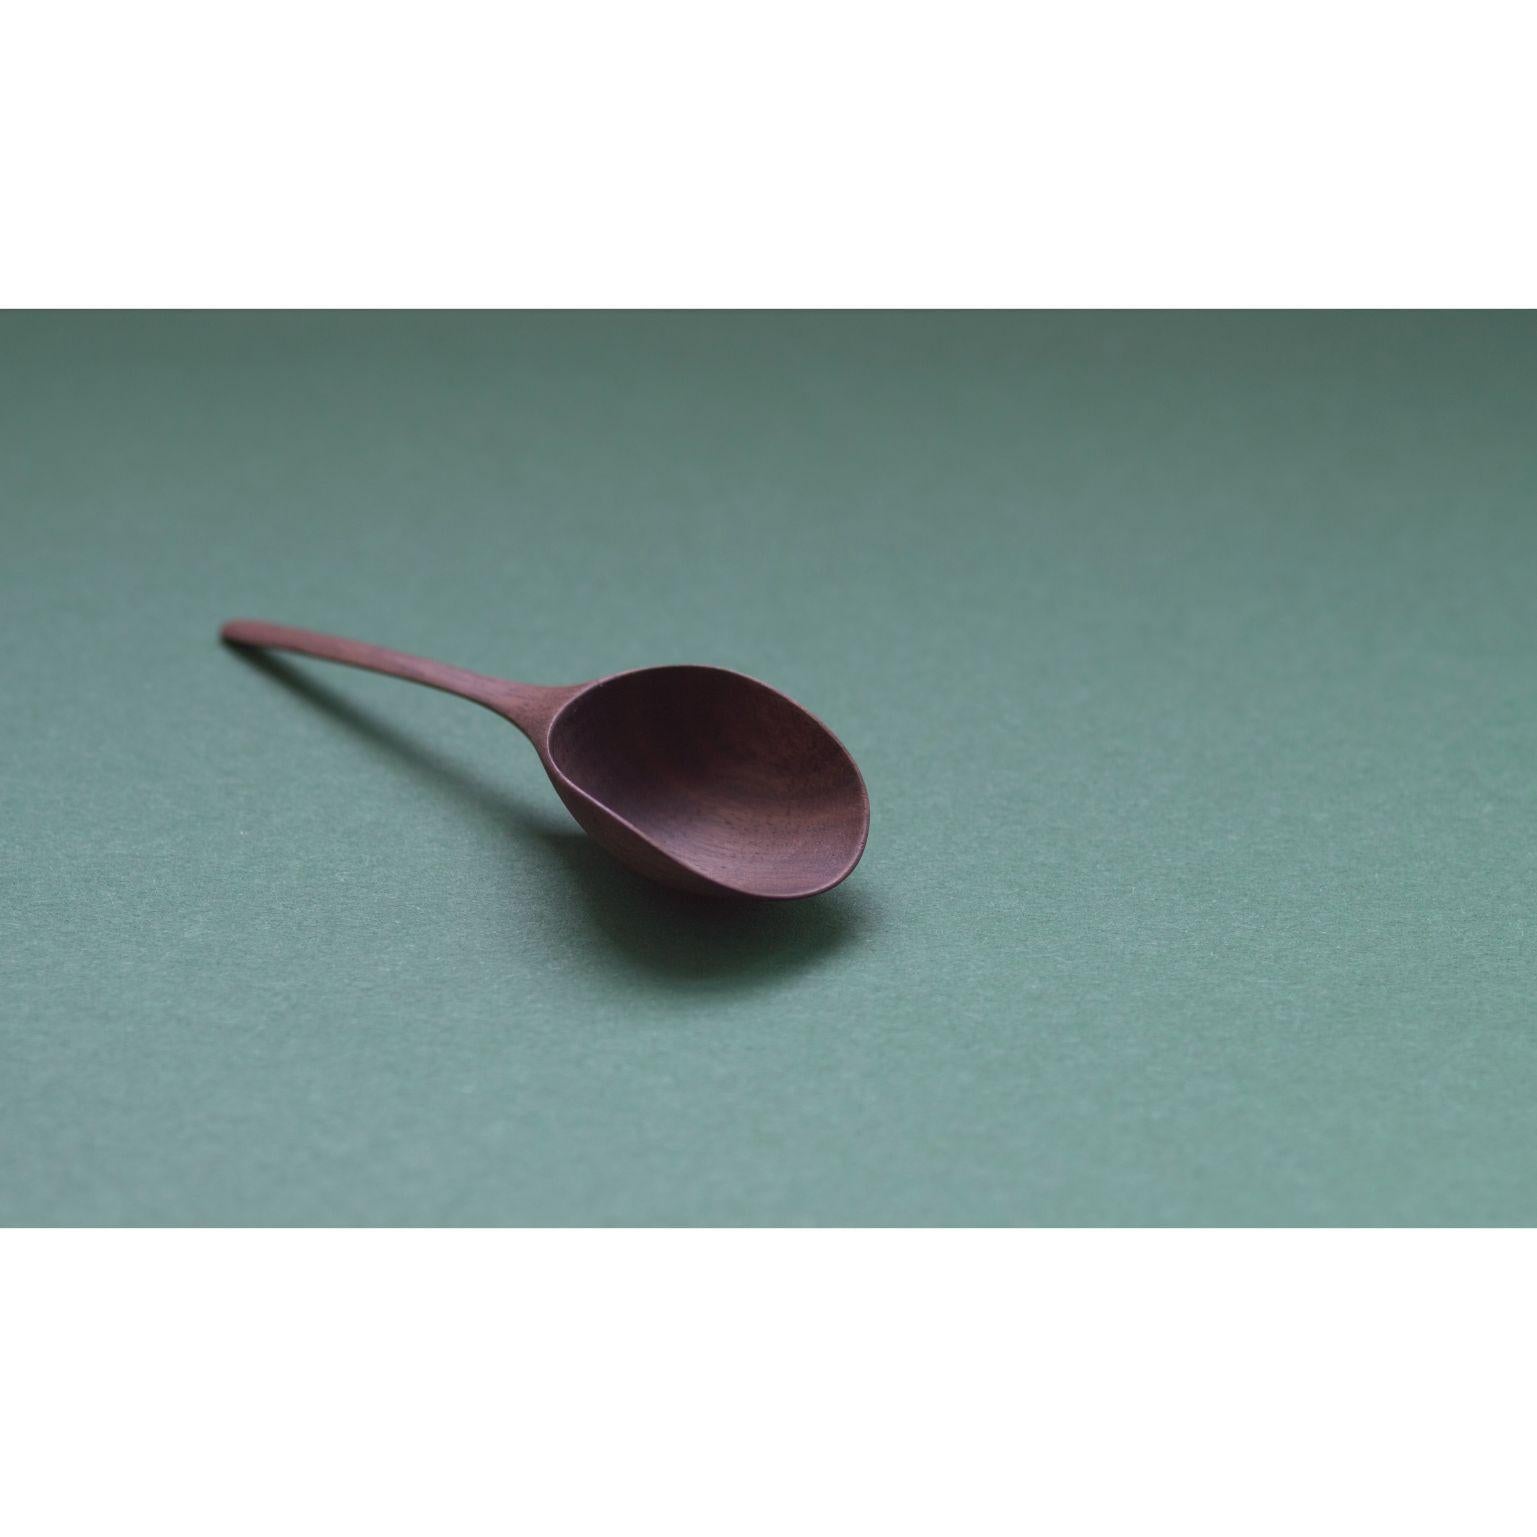 Kupu spoon by Antrei Hartikainen
Materials: Walnut, maple, natural oil wax
Dimensions: W 10 cm

Also available in a variety of woods

The unusual proportions of the kupu spoons give them an unexpected, delicate charm. Perfect for serving sugar, salt